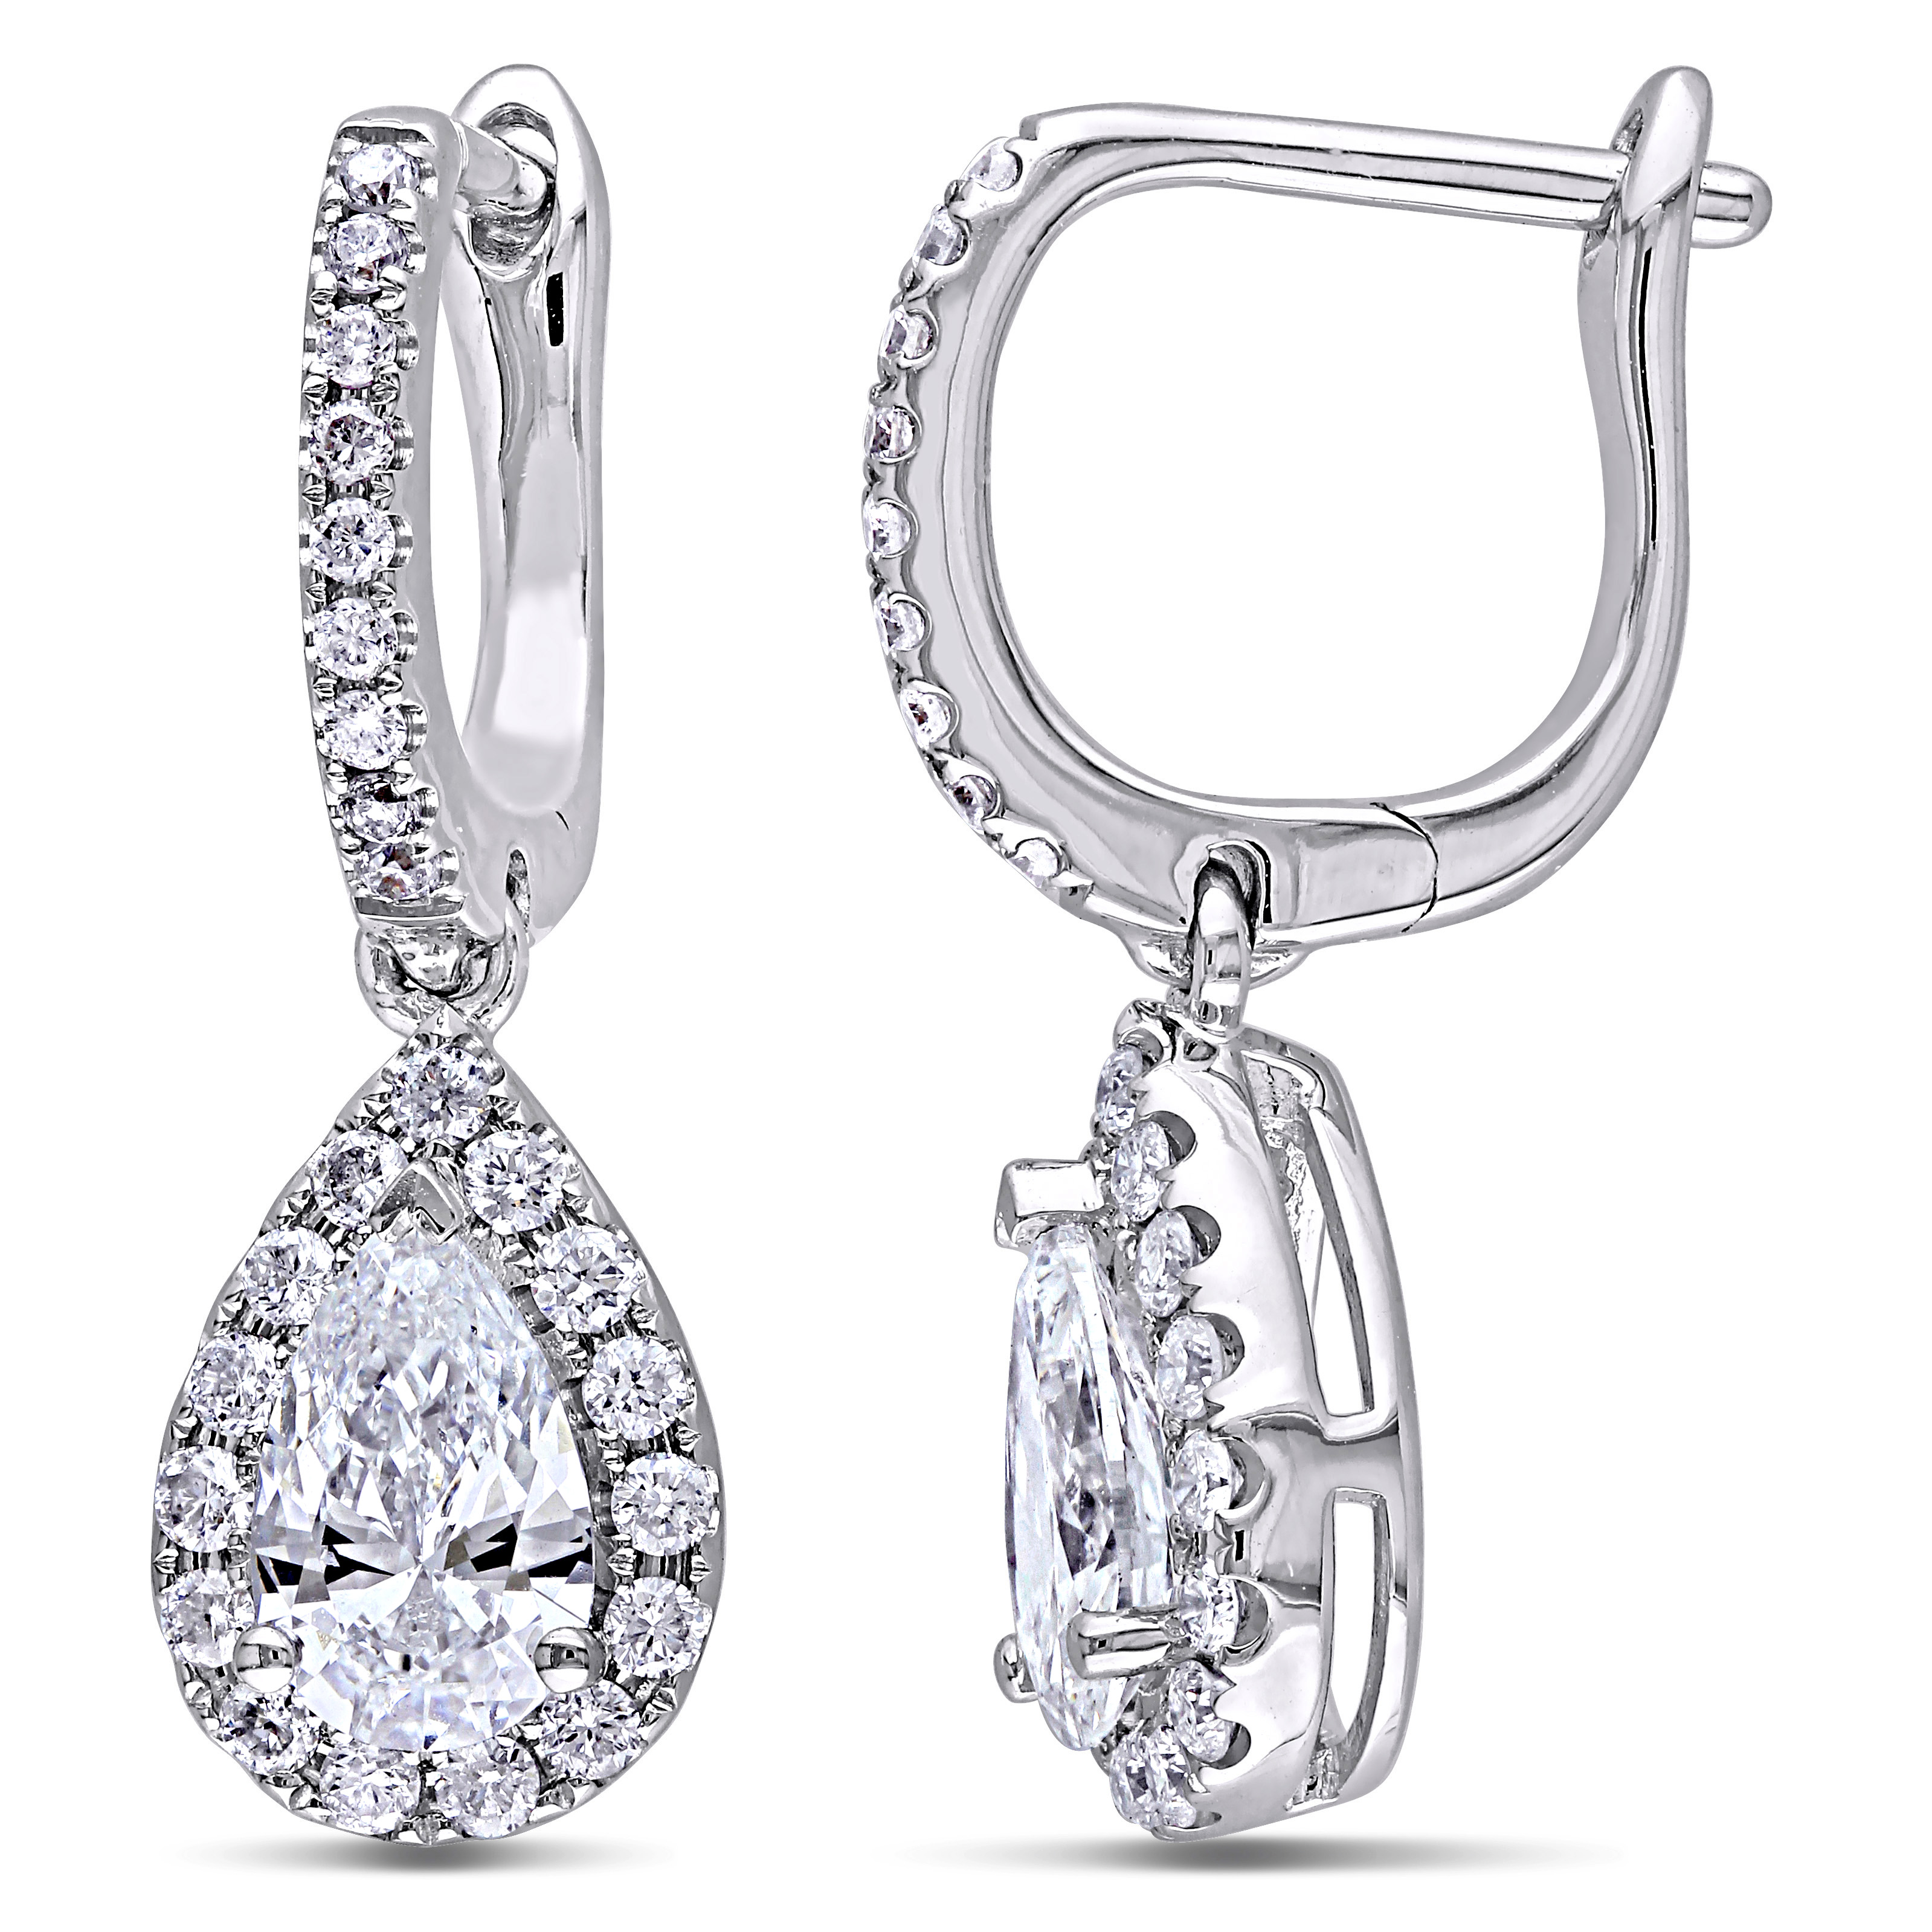 1 2/5 CT TW Pear Shaped Halo Diamond Leverback Earrings in 14k White Gold